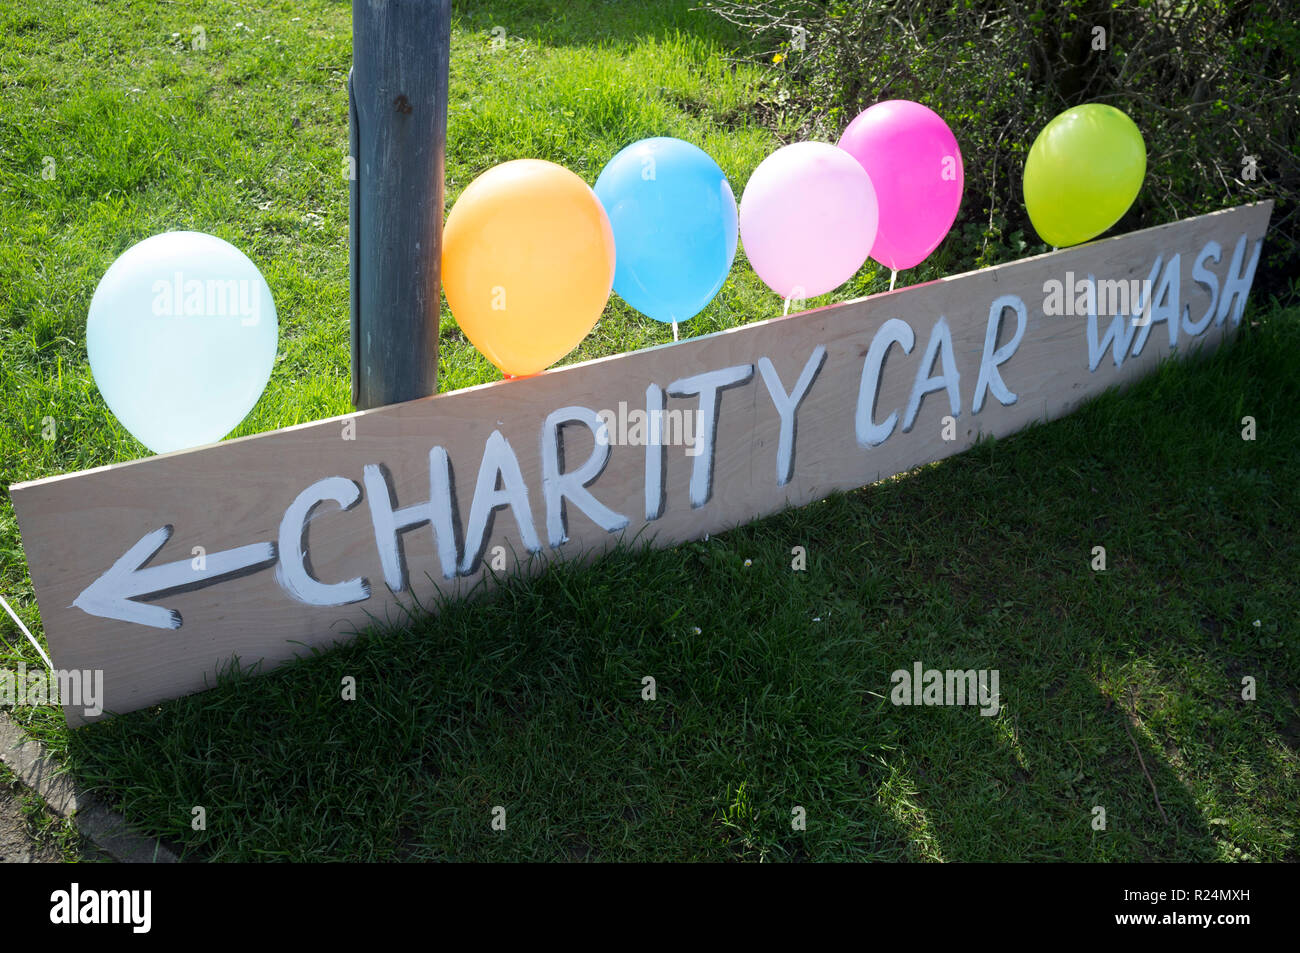 Homemade Charity Car Wash sign with brightly coloured backlit balloons Stock Photo